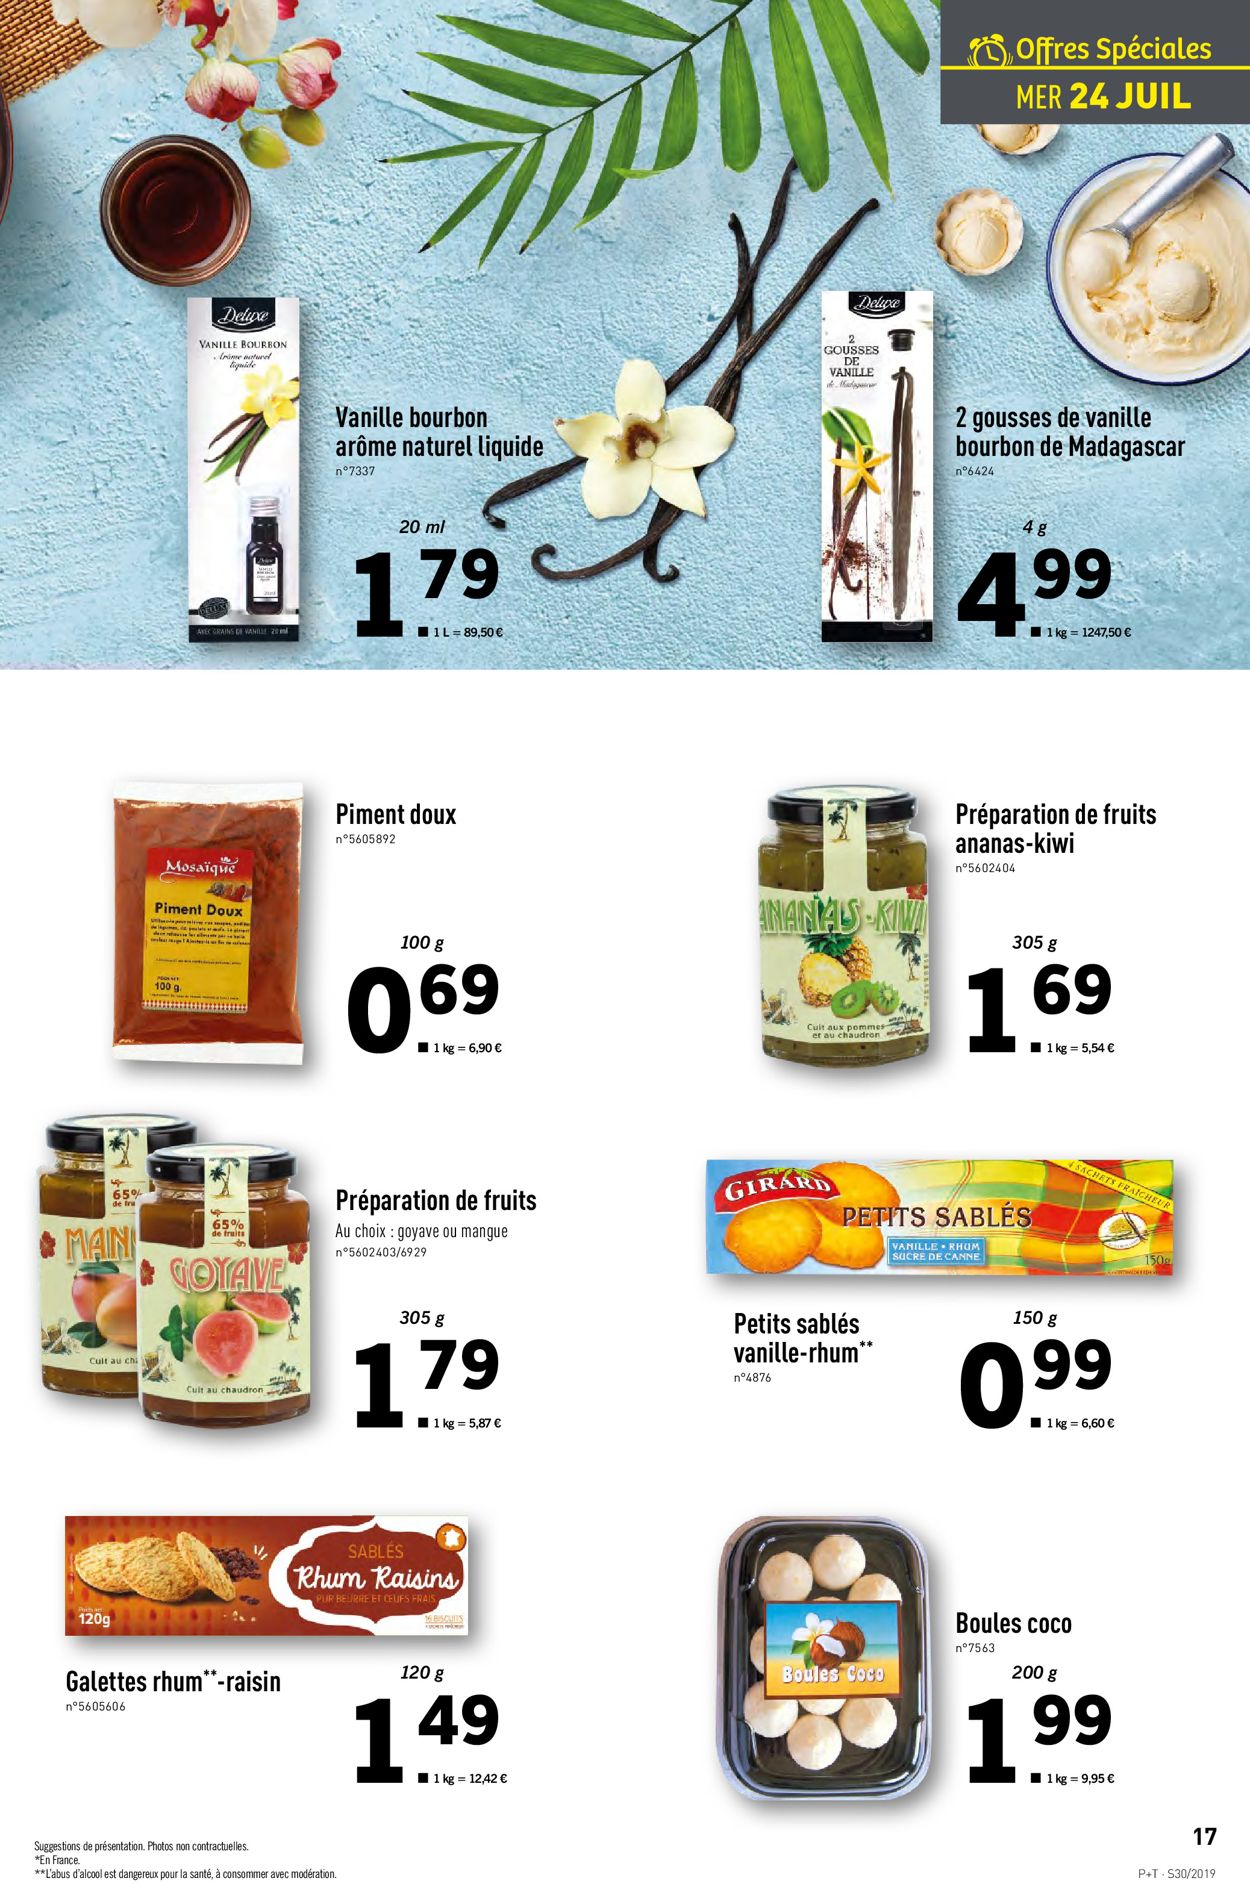 Lidl Catalogue - 24.07-30.07.2019 (Page 17)